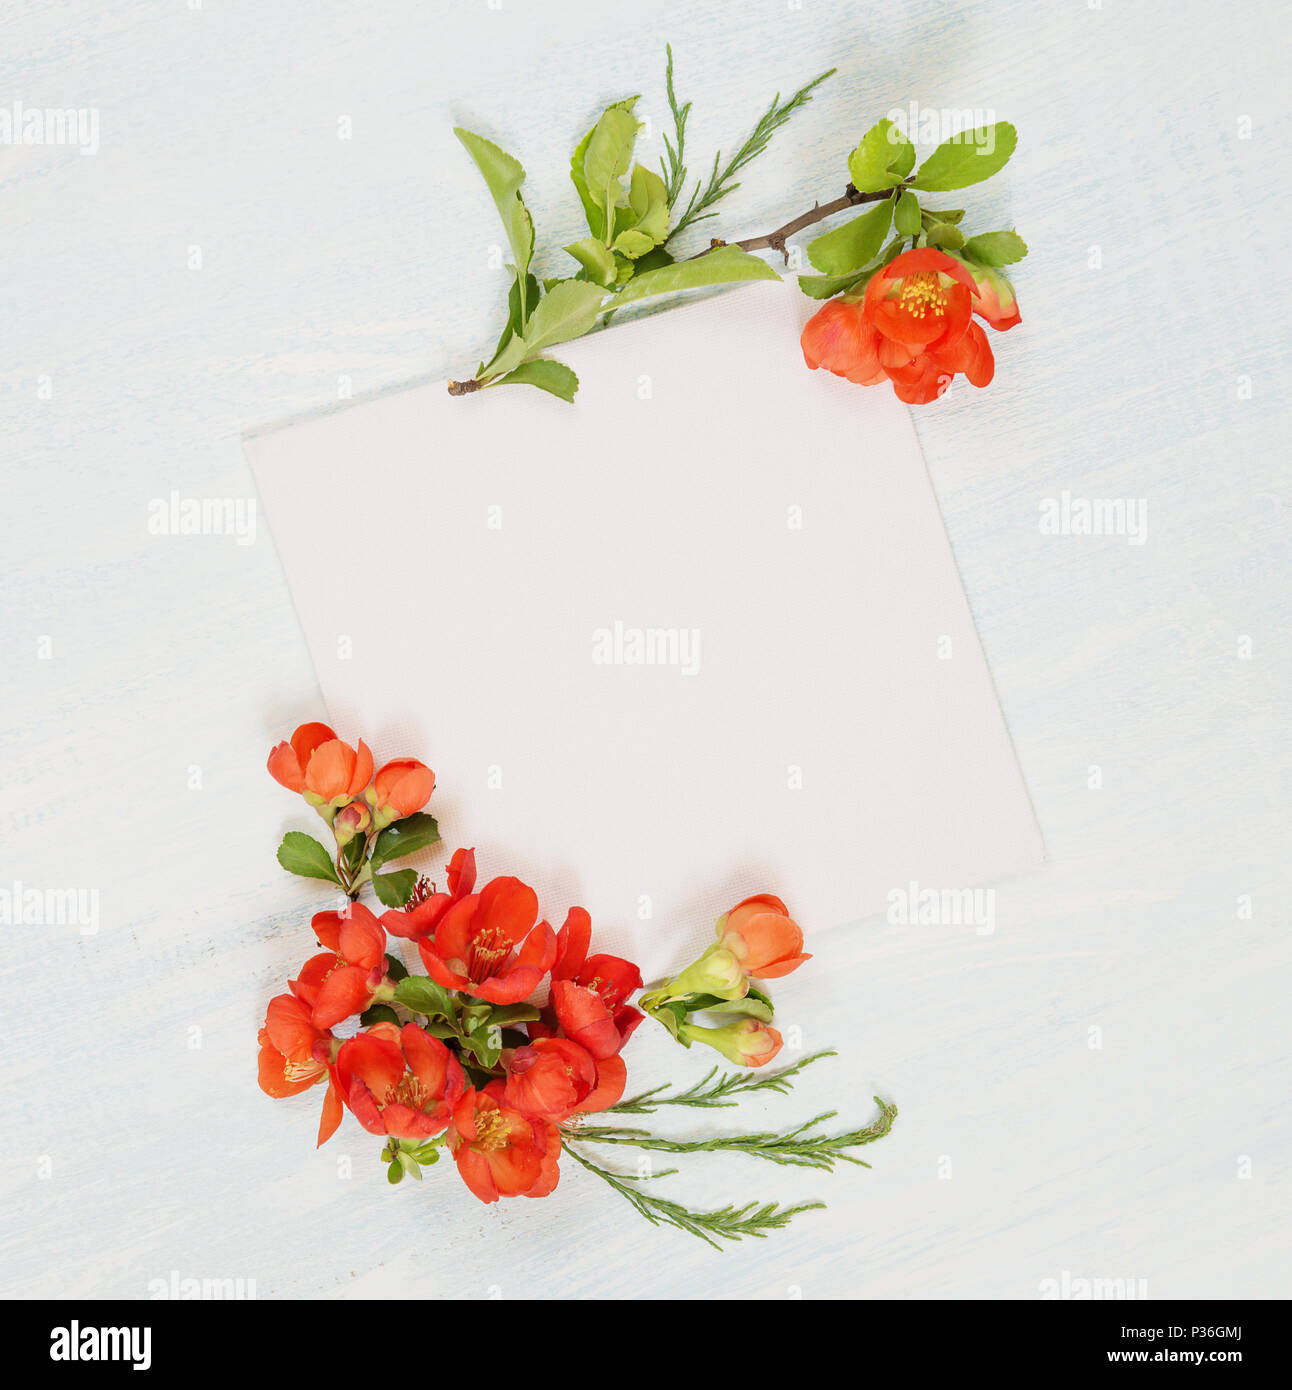 Scrapbook page of wedding or family photo album, frame with red  Chaenomeles japonica flowers and green leaves on light wooden background; top view, f Stock Photo